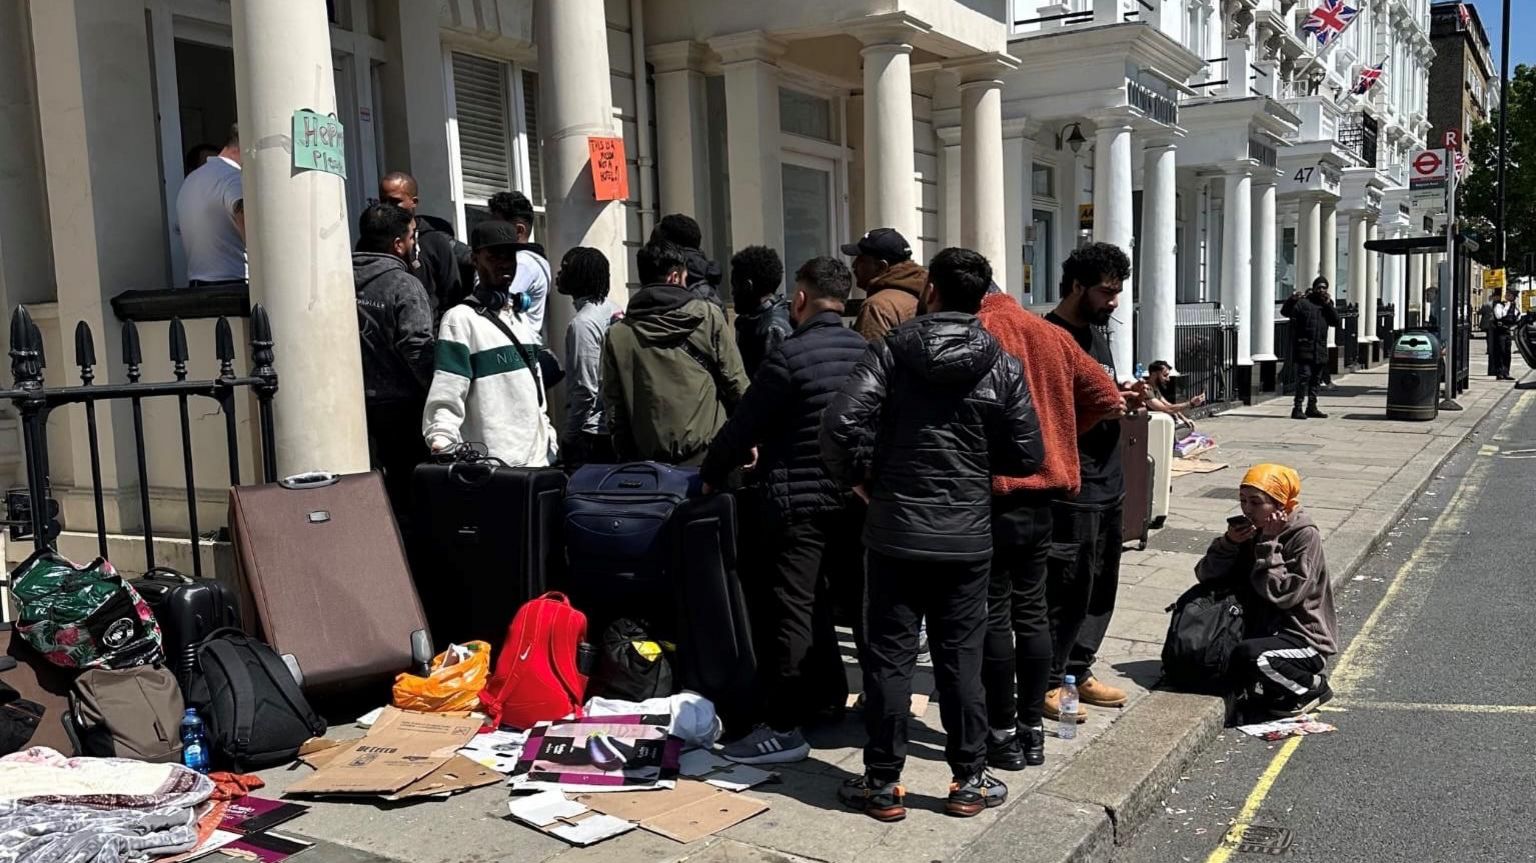 Pimlico Asylum Seekers Left On The Street After Hotel Dispute Bbc News